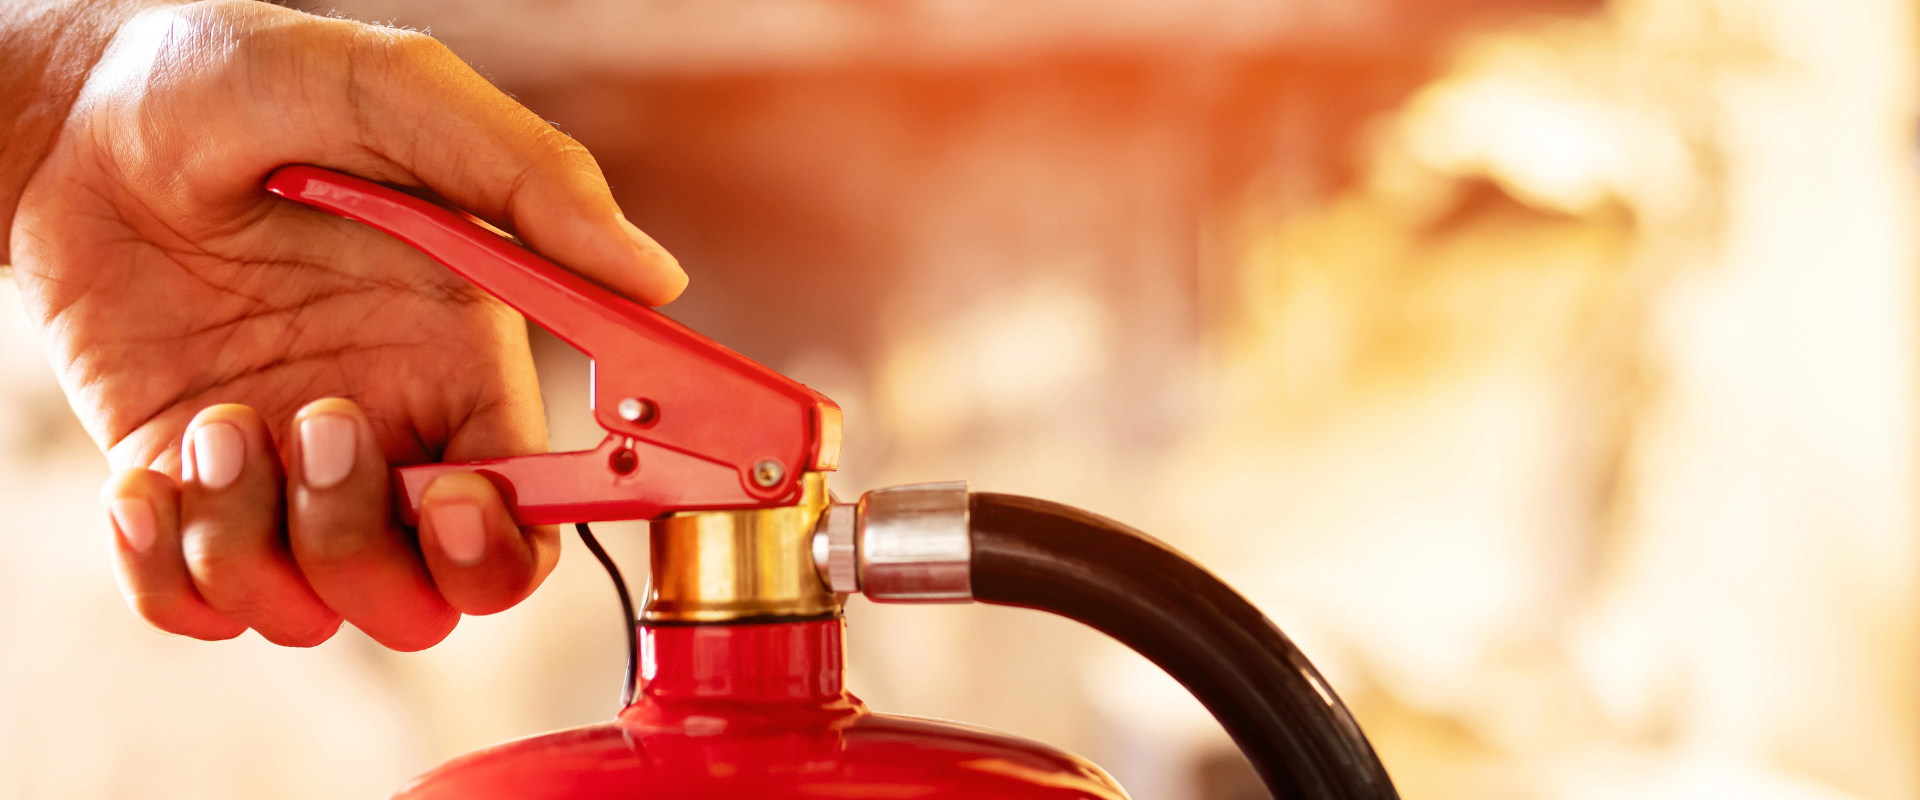 Ensuring Fire Safety in Bhiwandi Thane: Oxytech Fire Safety Systems